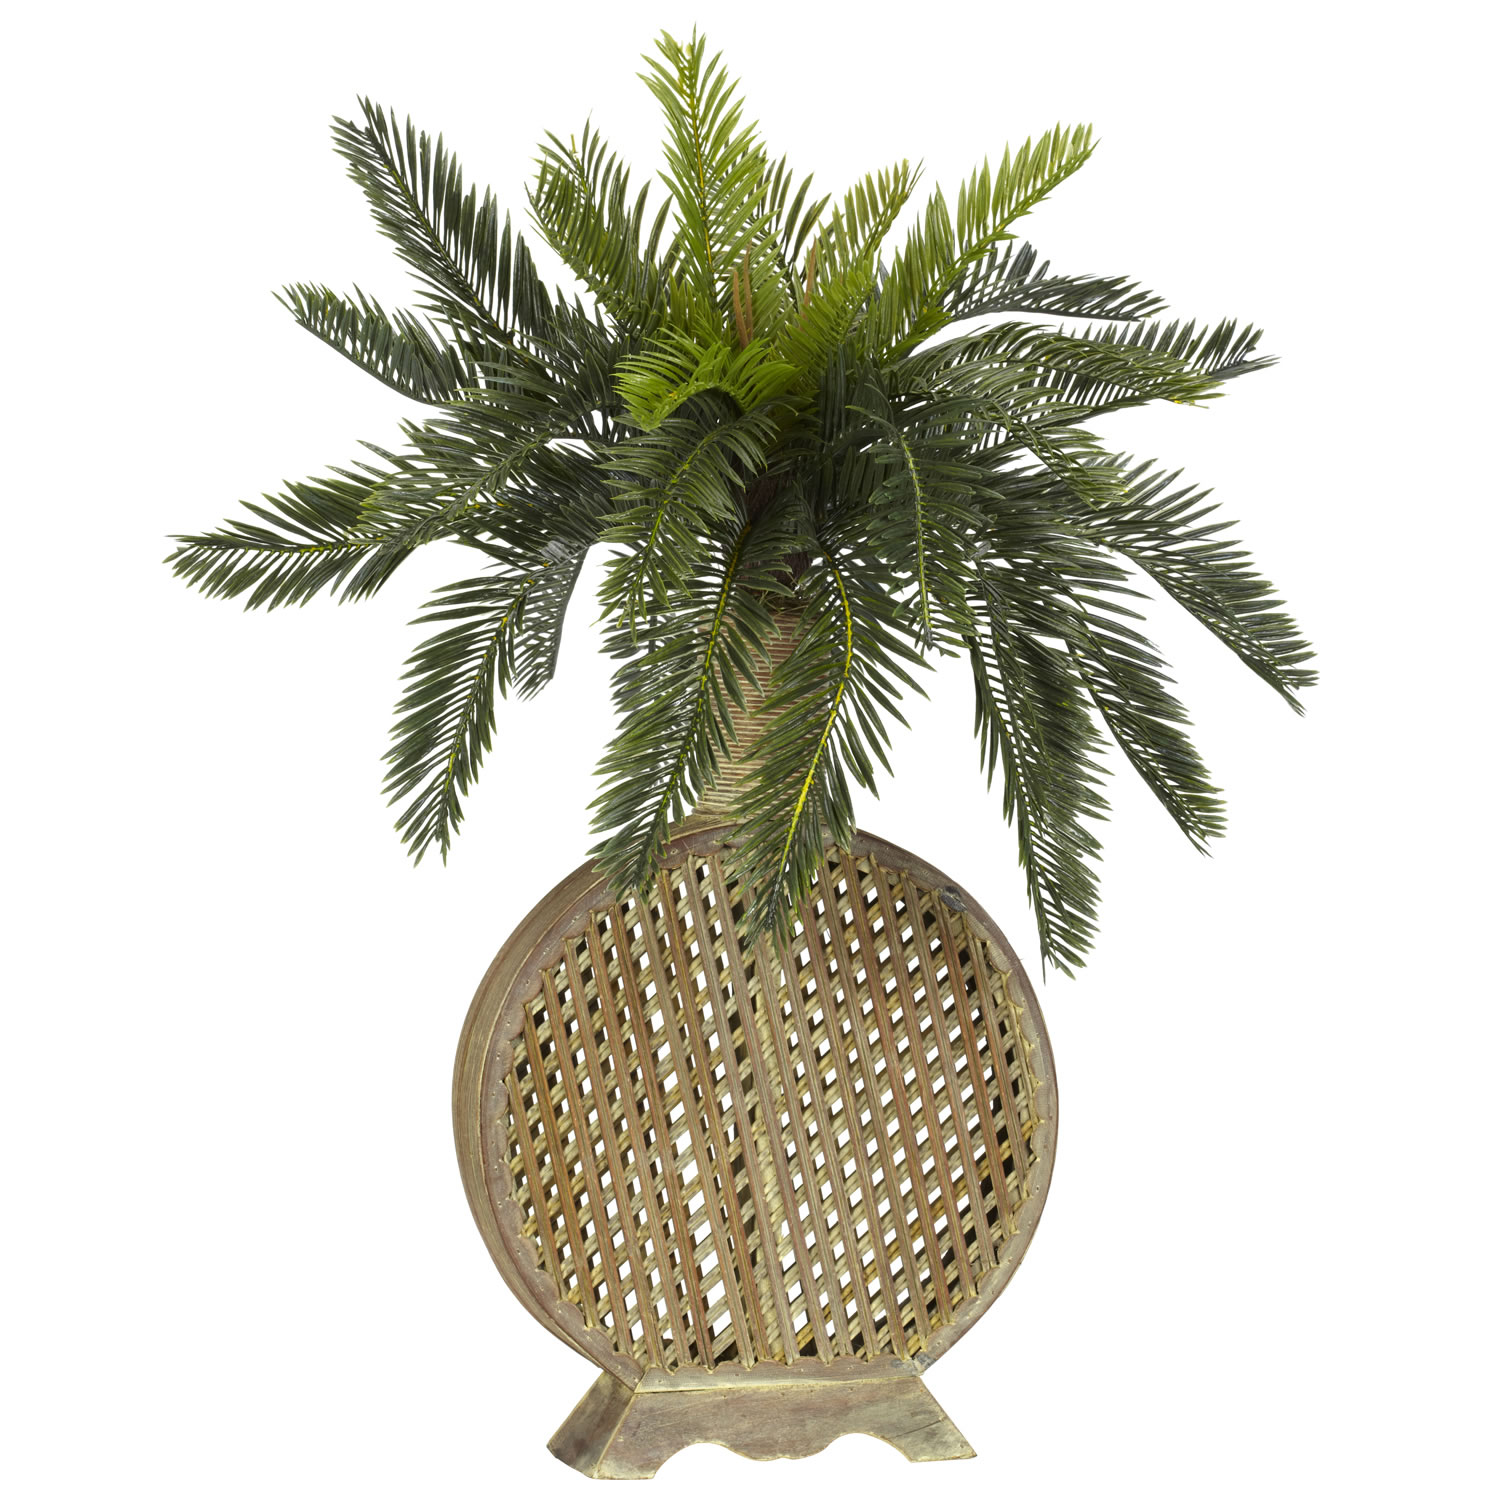 25 Inch Cycas Palms In Decorative Vase